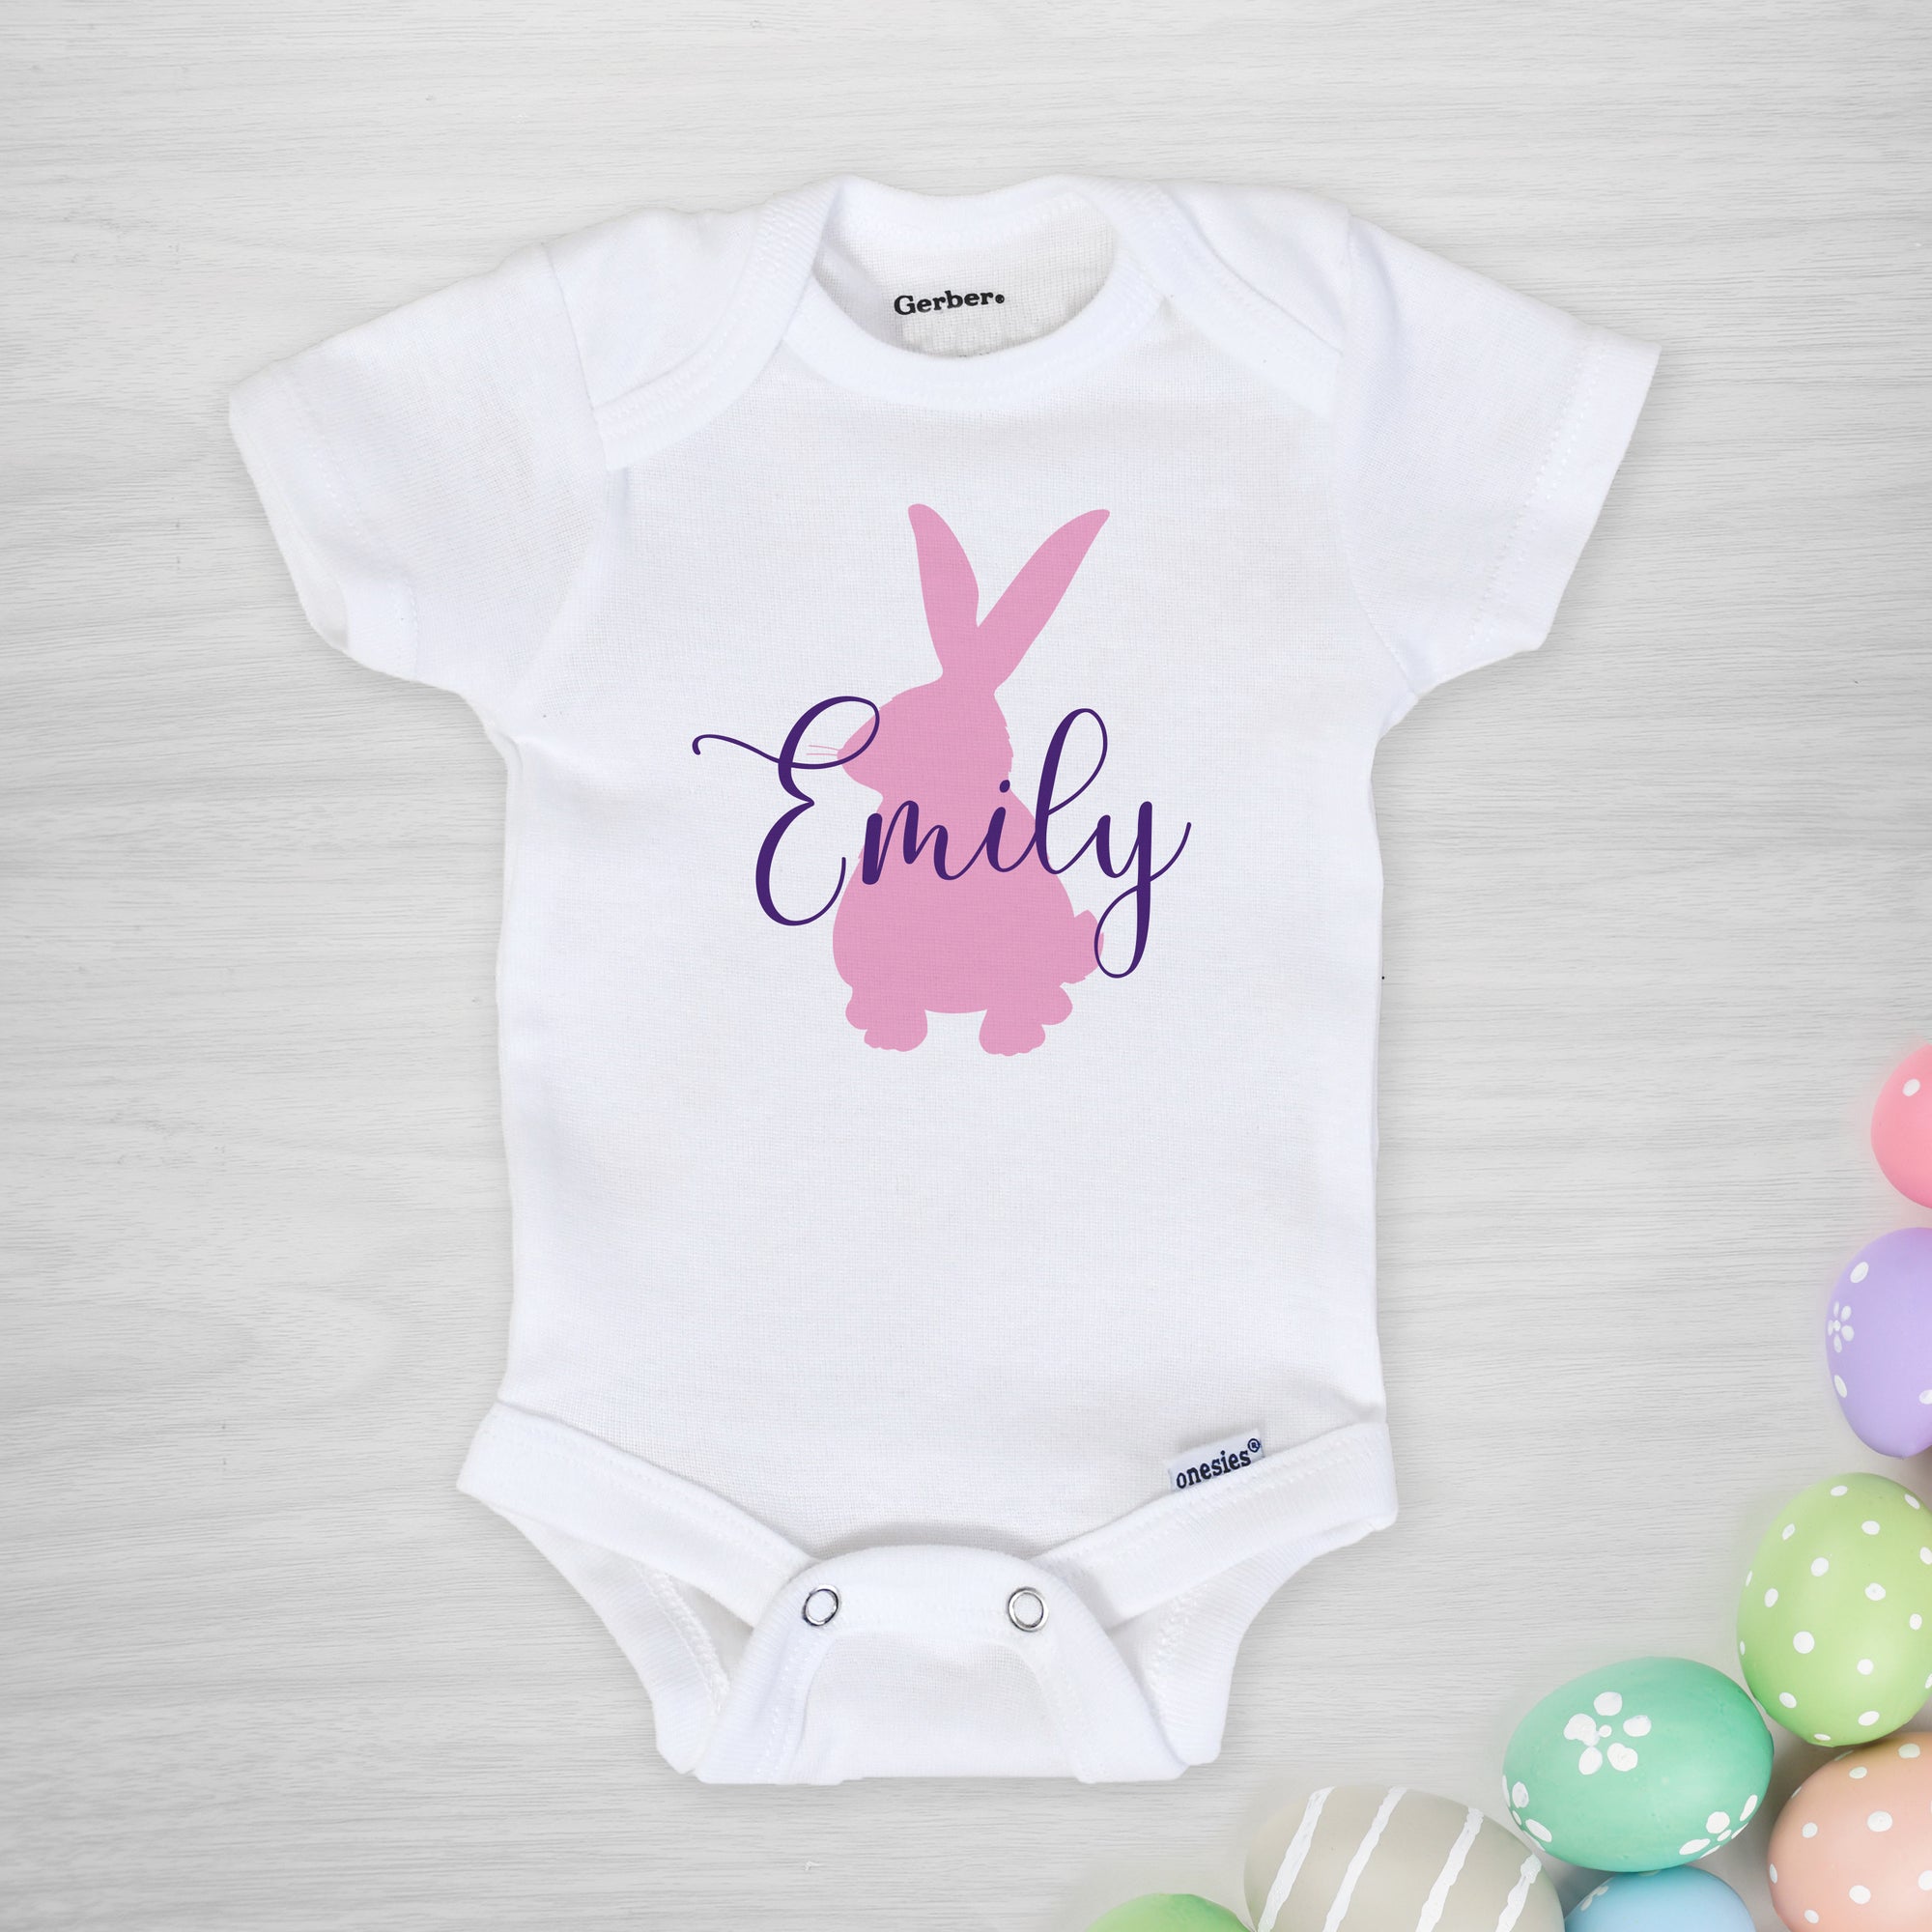 Bunny Silhouette Personalized Gerber Onesie®, Pick your colors, short sleeved